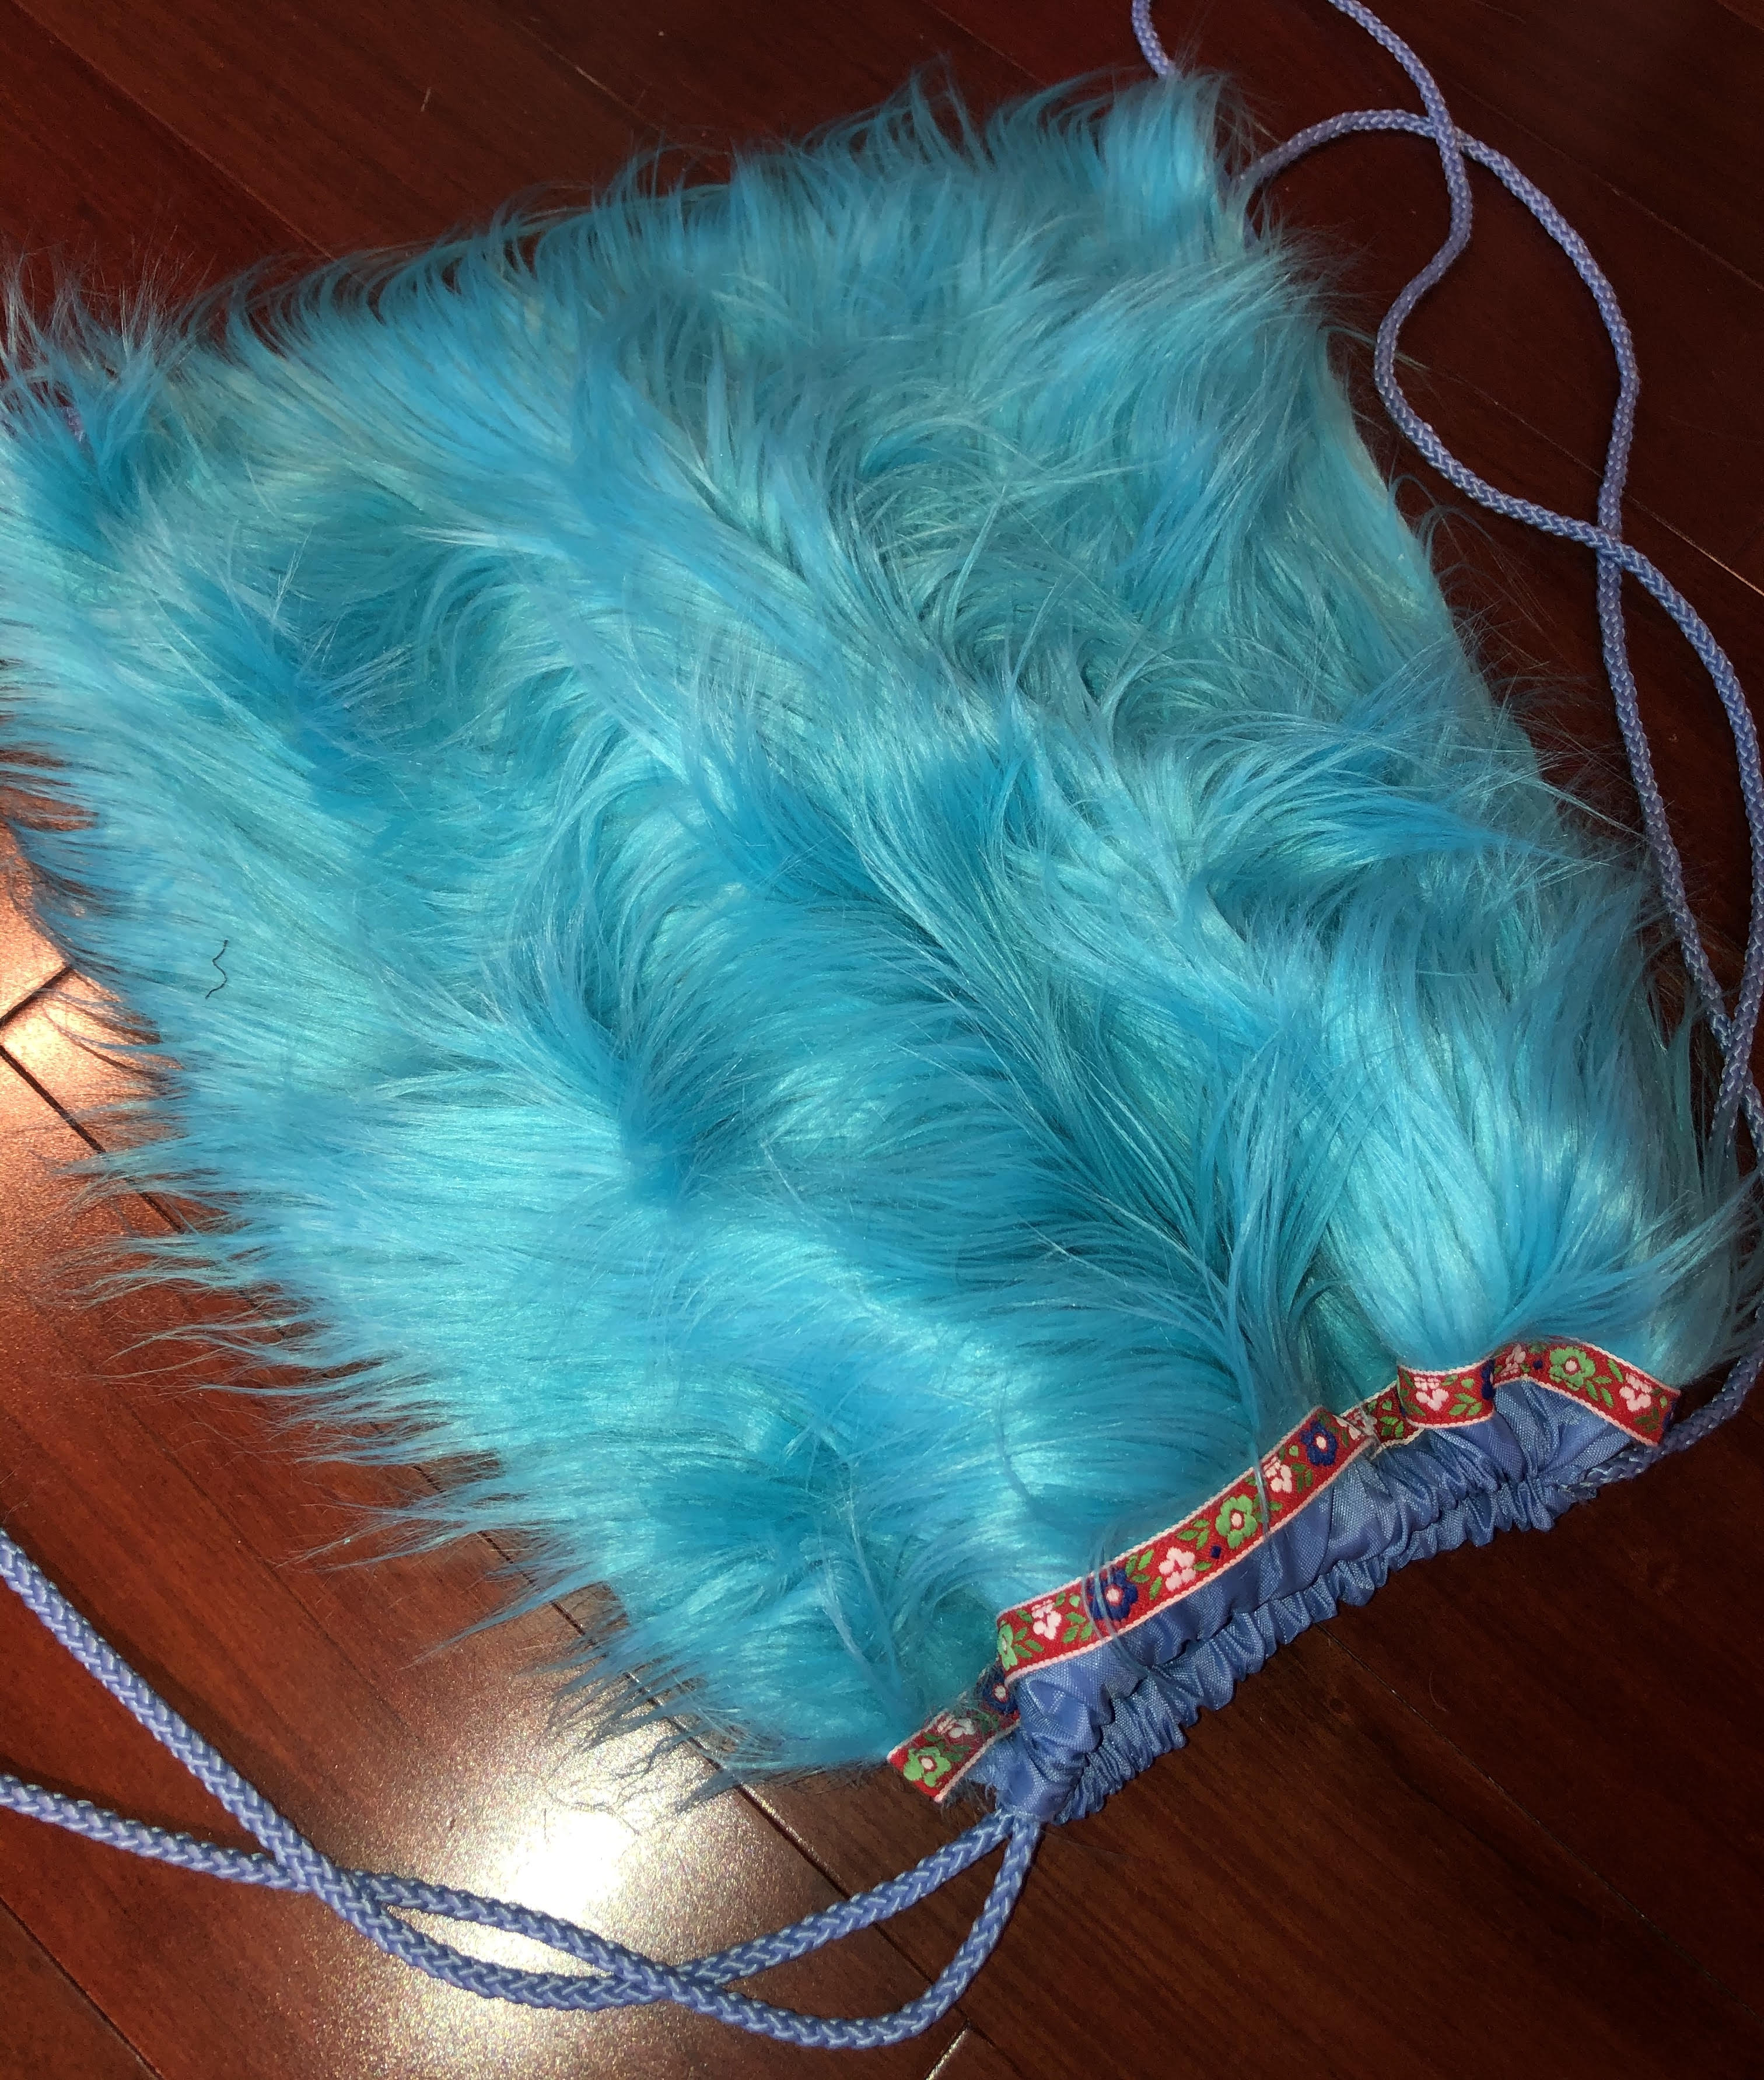 Turquoise Fake Fur Backpack